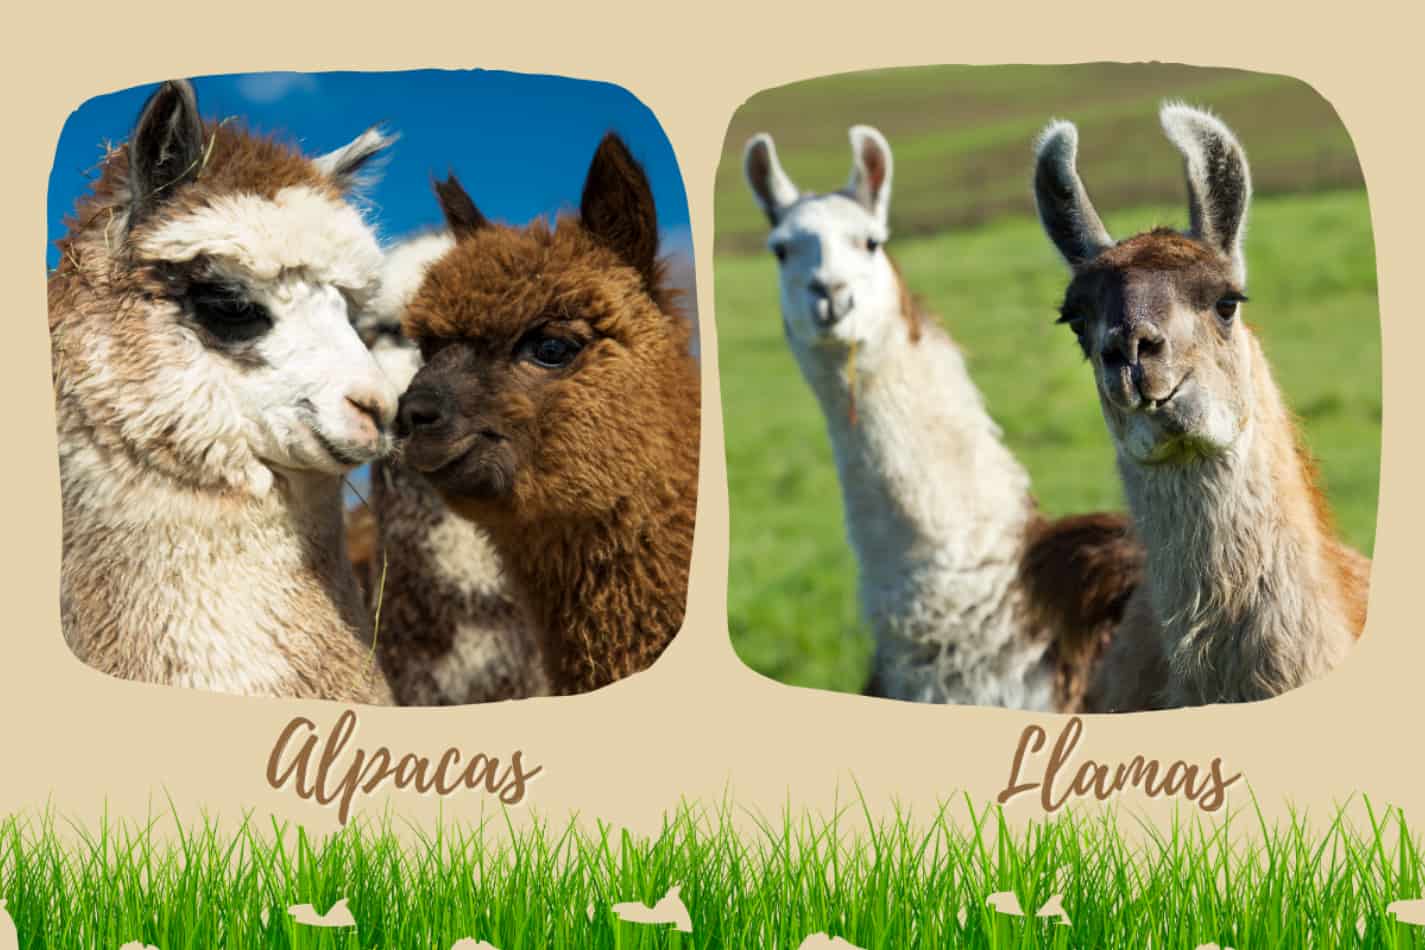 Alpacas and Llamas: Which is Better, Friendlier, Kinder, etc?